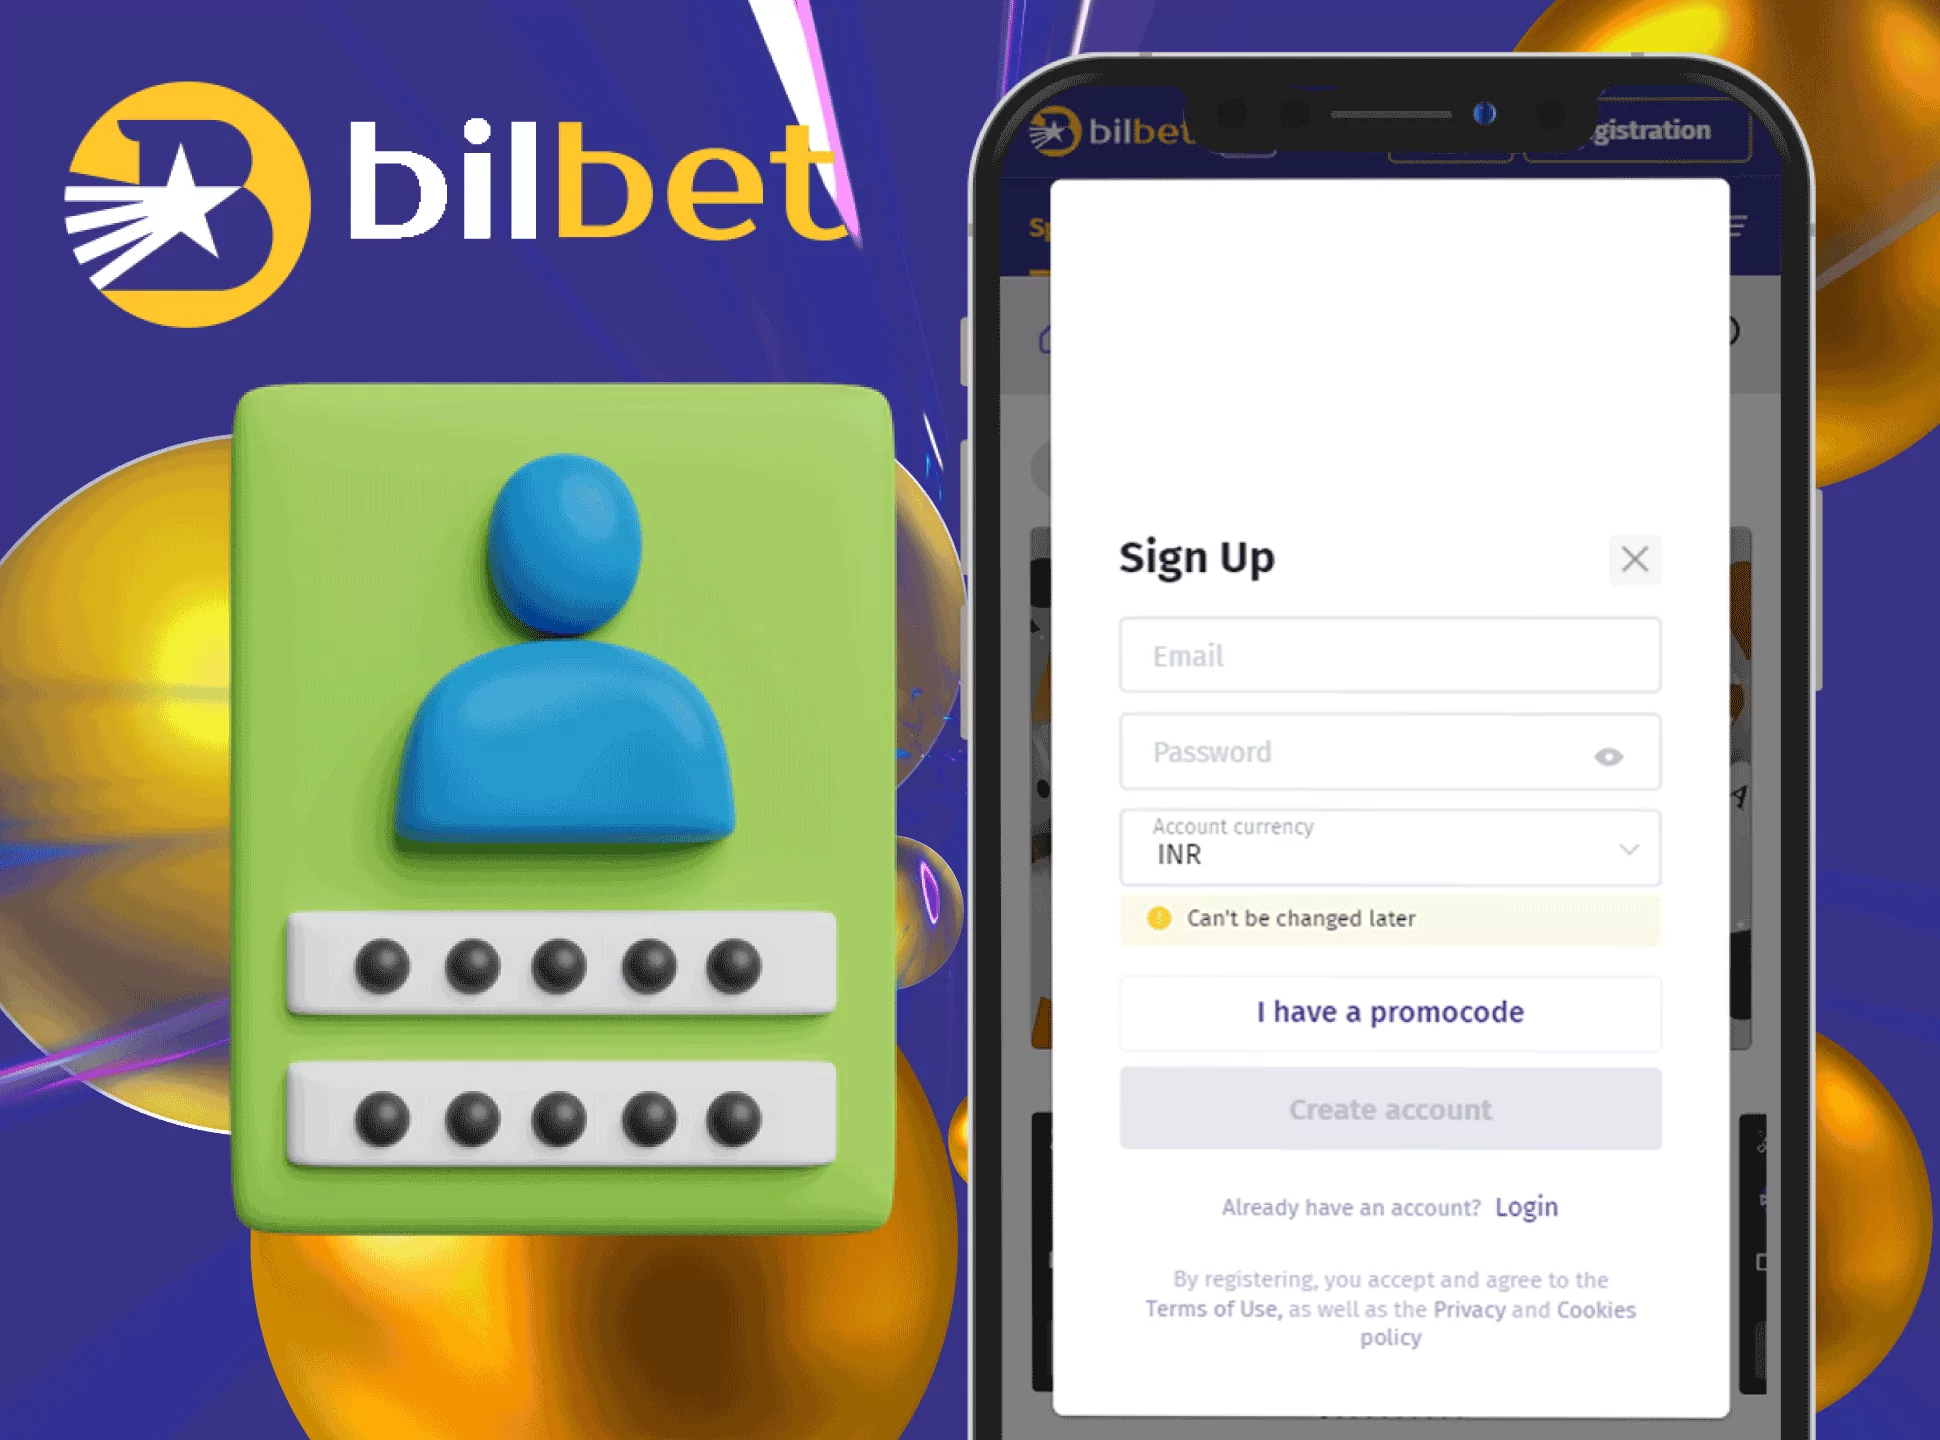 Download the Bilbet app and create an account there right after installation.